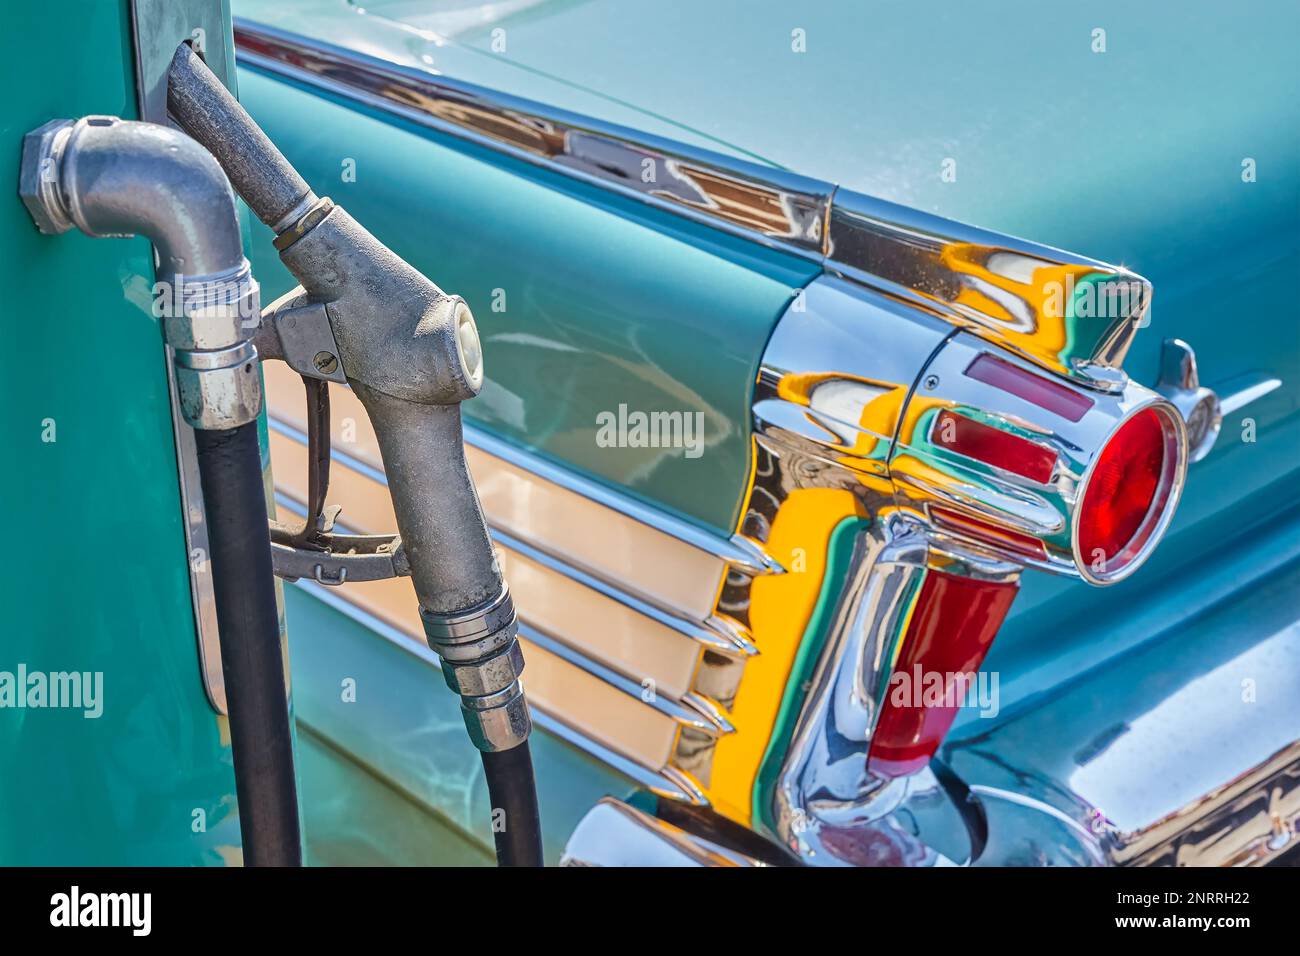 Retro styled image of an old fuel pump and green classic car Stock Photo